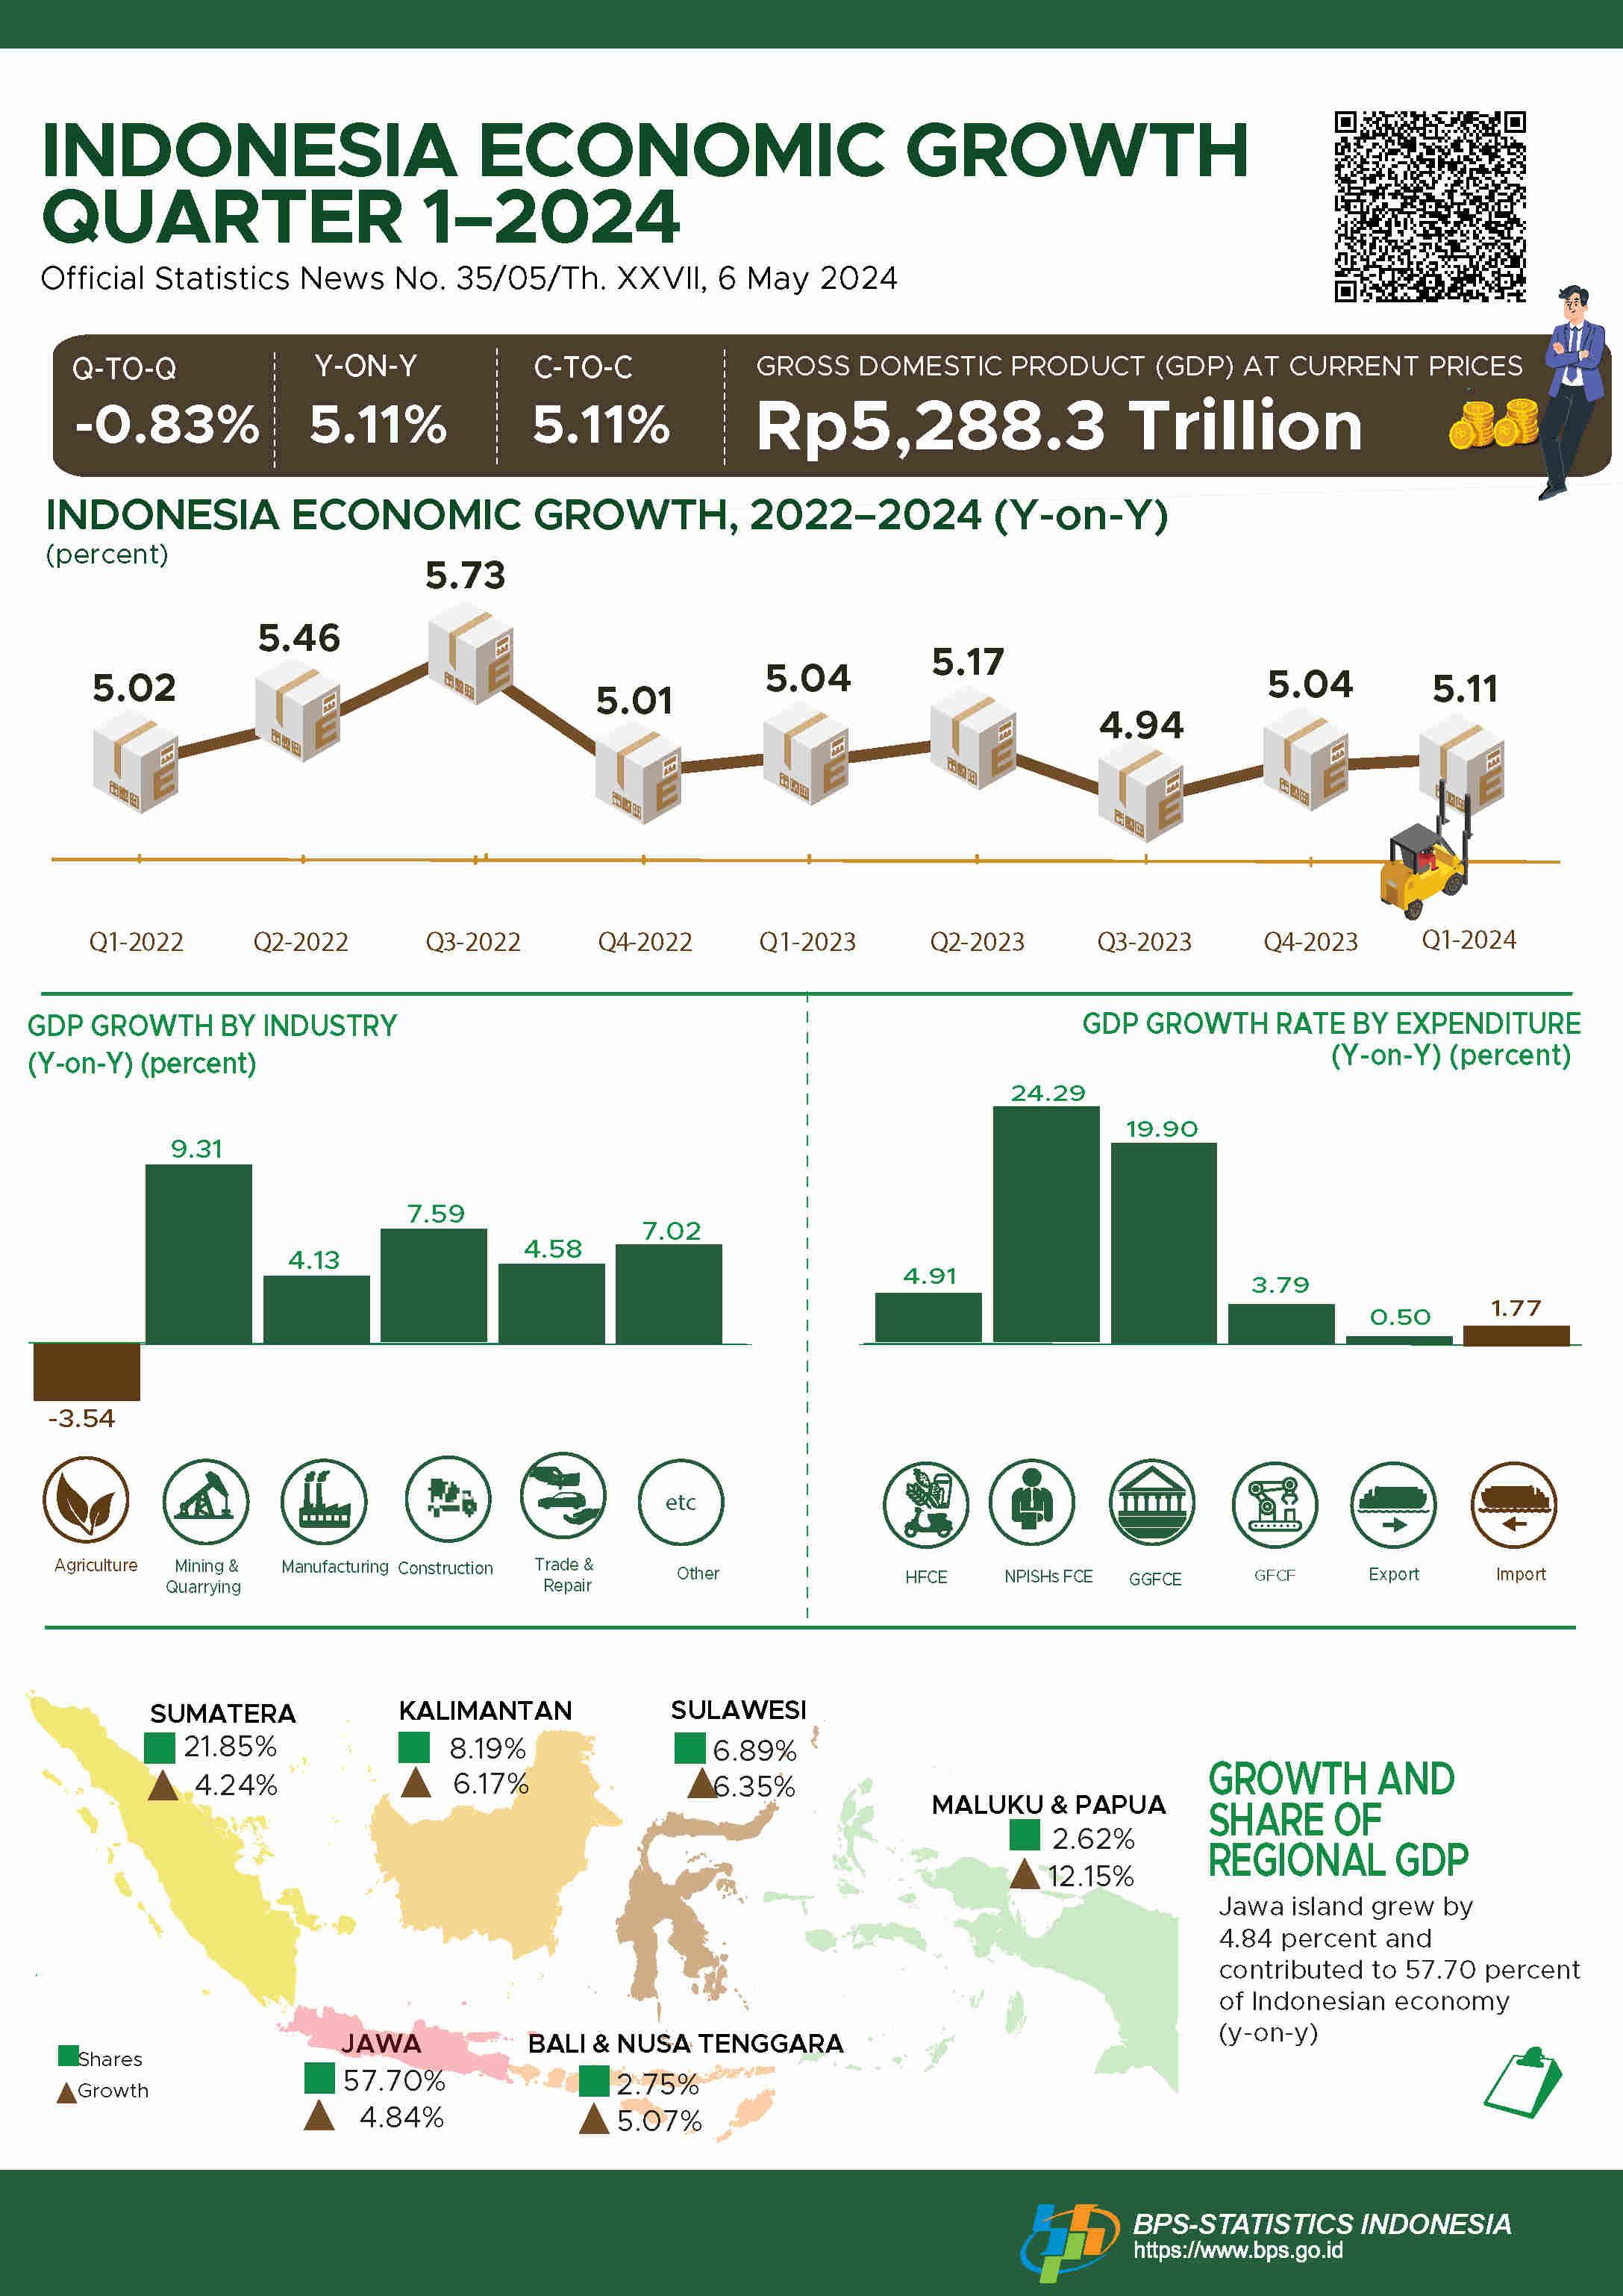 Indonesia’s GDP Growth in Q1-2024 was 5.11 Percent (y-on-y) and Indonesia’s GDP Growth in Q1-2024 was -0.83 Percent (q-to-q).